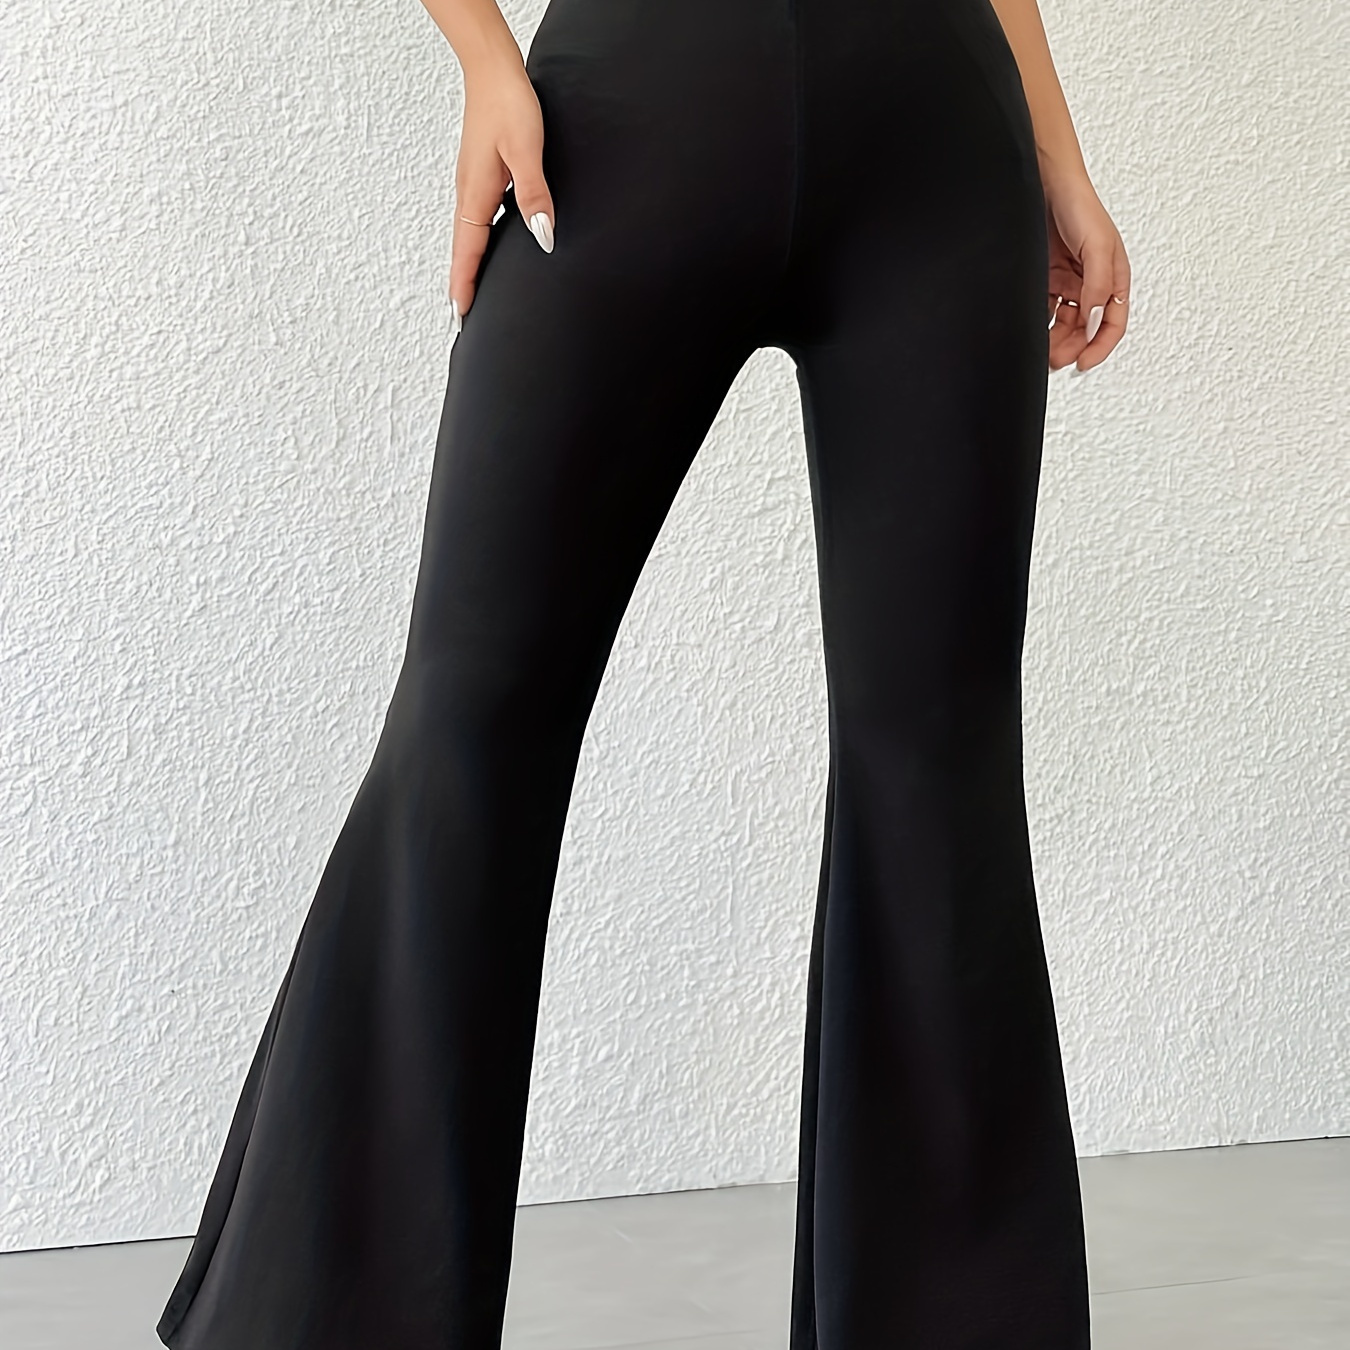 

Solid Color Flare Leg Pants, Casual High Waist Forbidden Pants For Spring & Summer, Women's Clothing